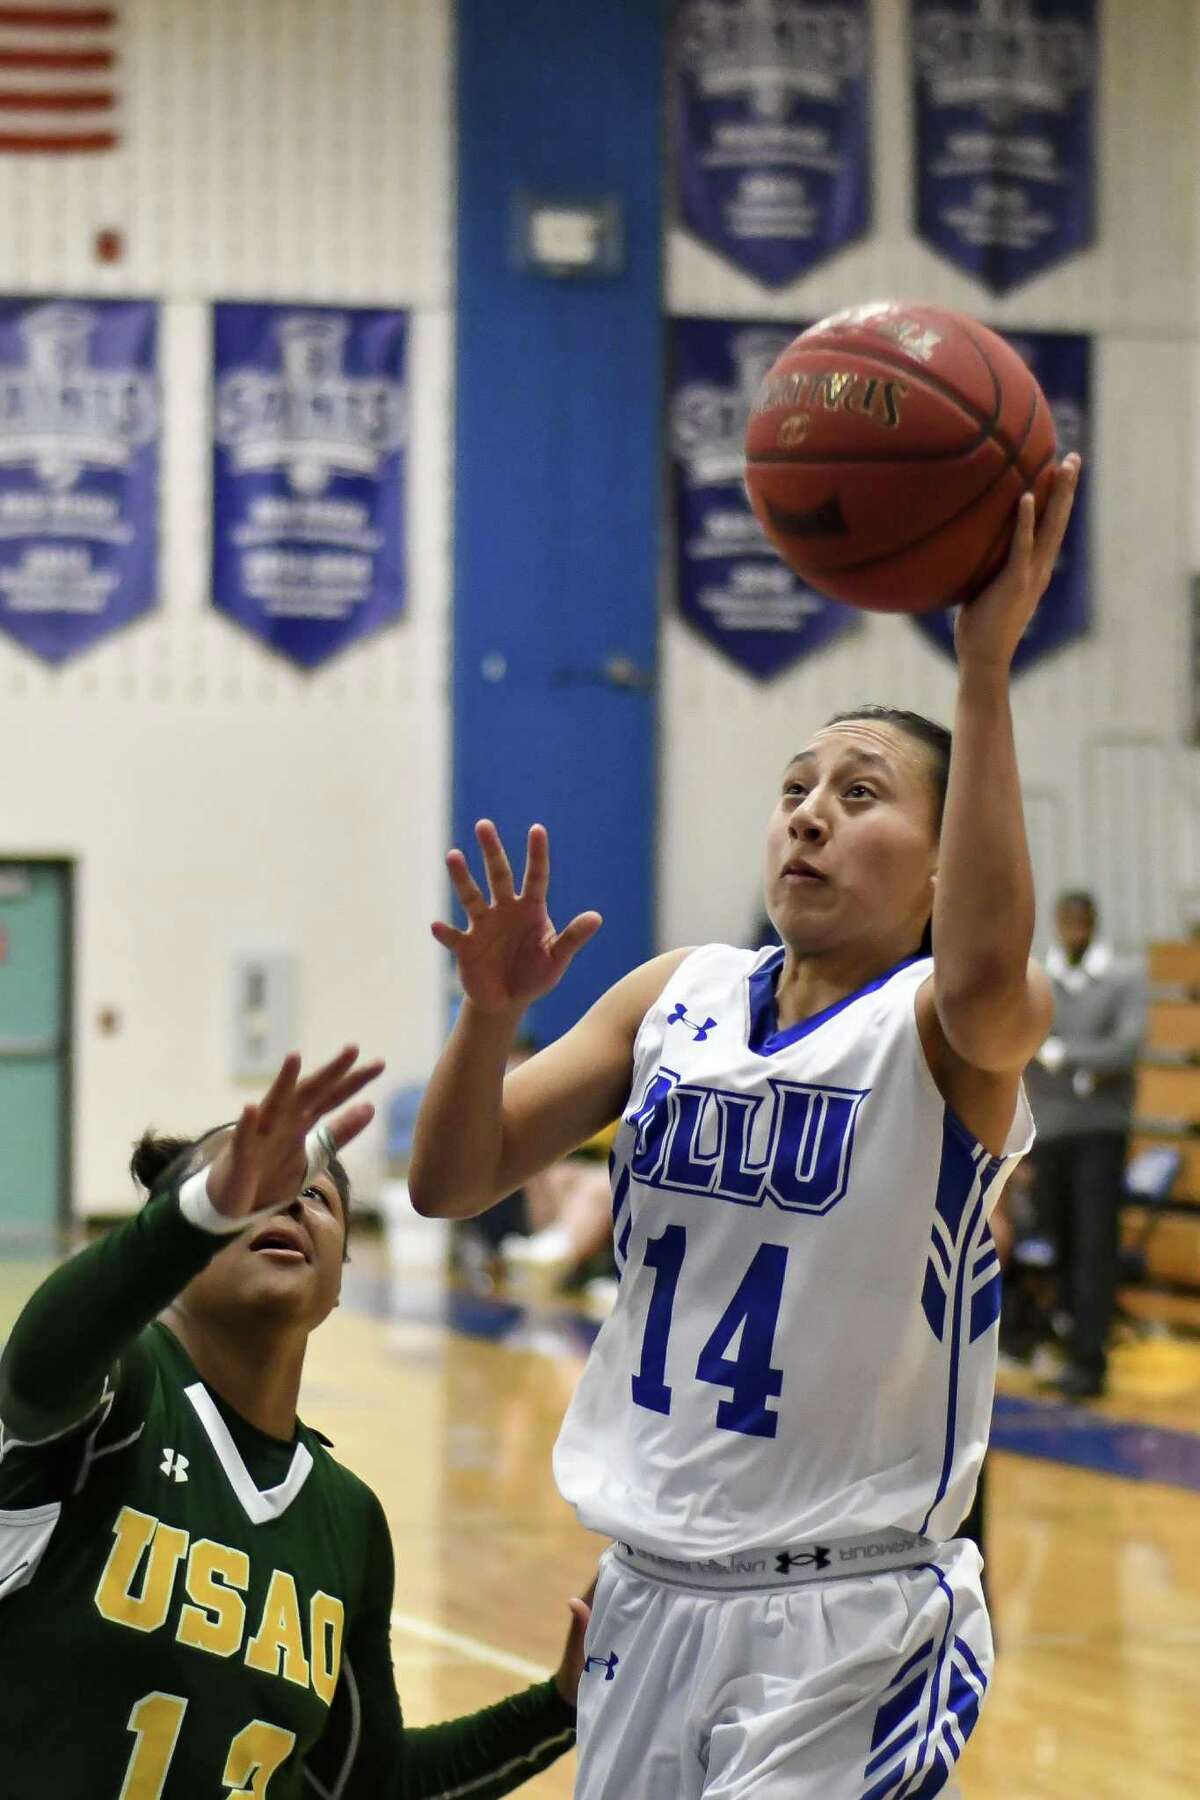 Our Lady of the Lake's Julia Rendon, a junior shooting guard, ranks first nationally in NAIA Division I in total 3-pointers made and first in 3-pointers made per game (3.5).